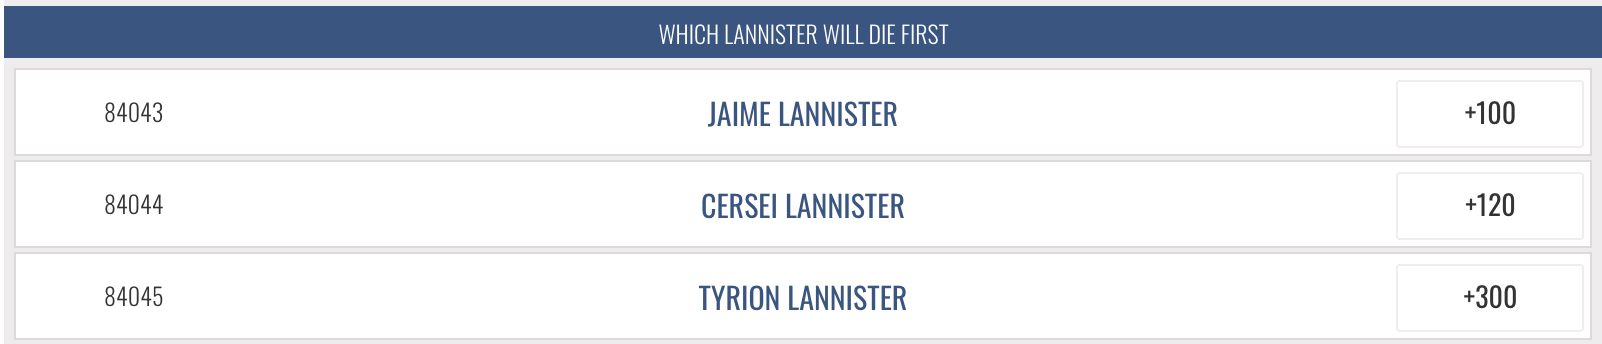 Which Lannister will die first betting odds